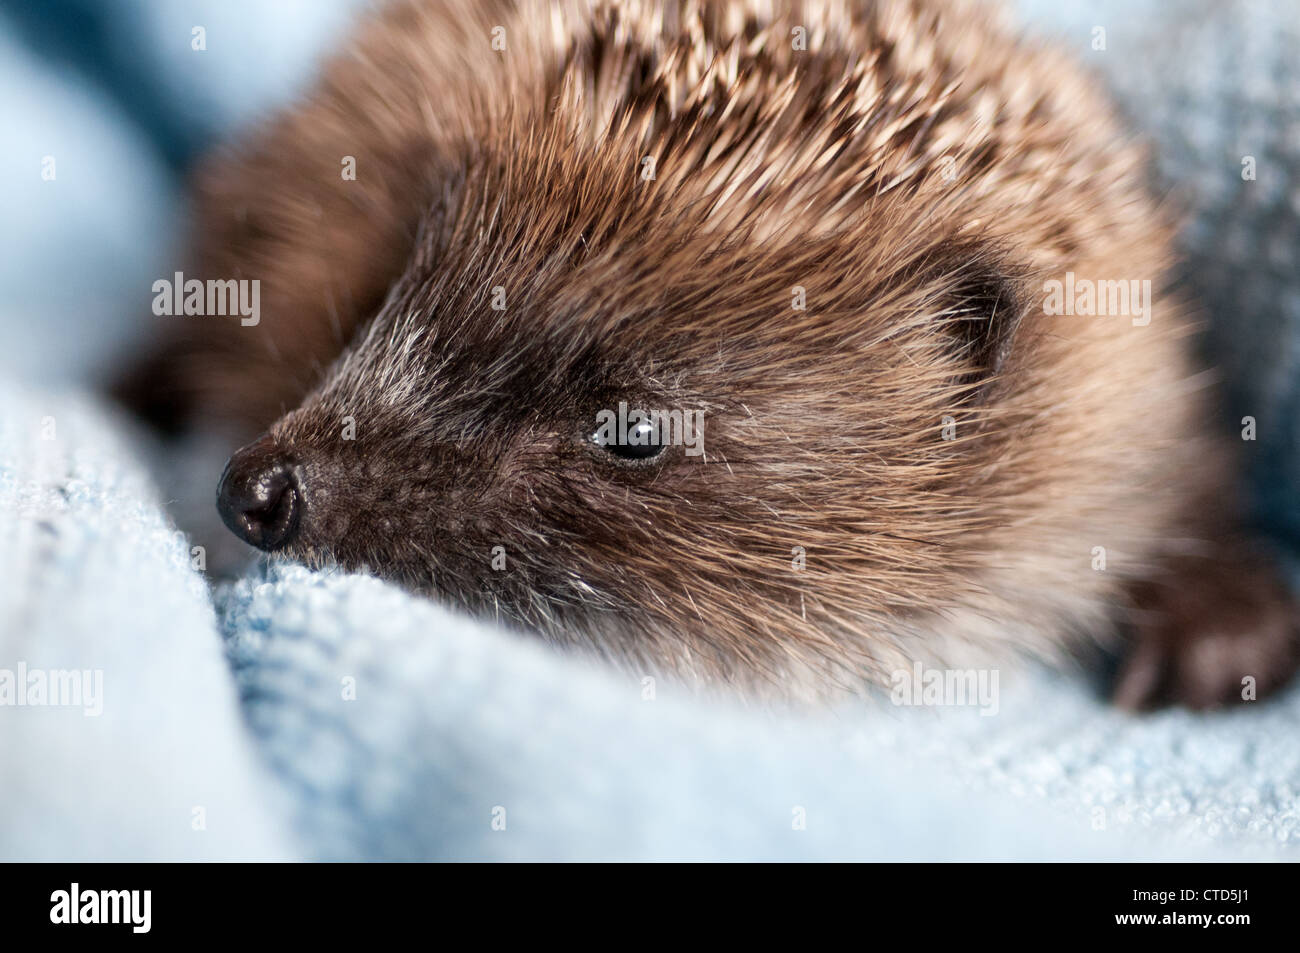 A hedgelet found on the road is taken care off Stock Photo